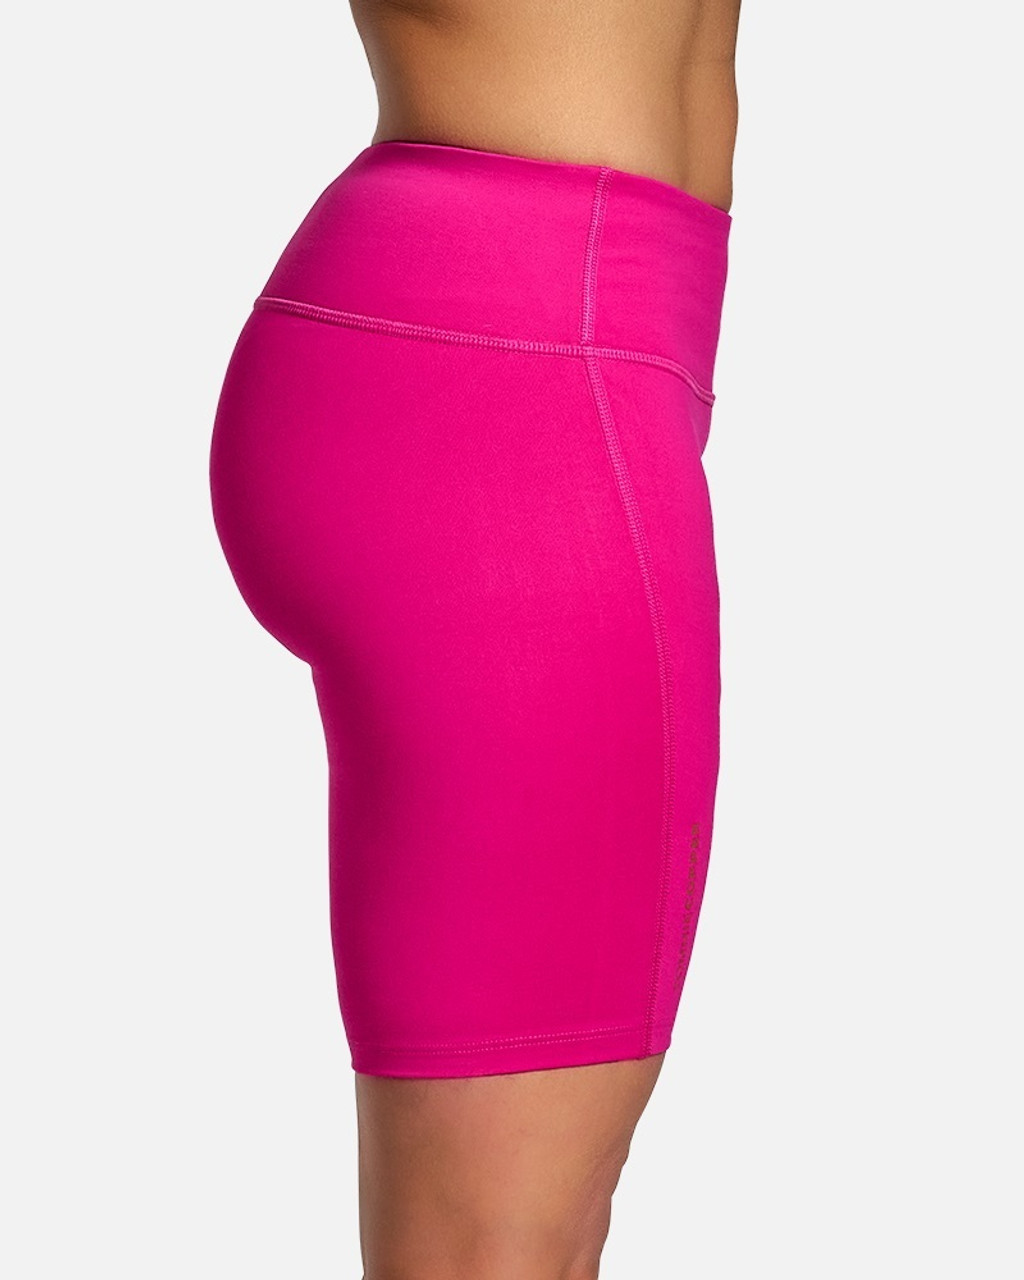 Tommie Copper Women's Back Support Compression Undershorts